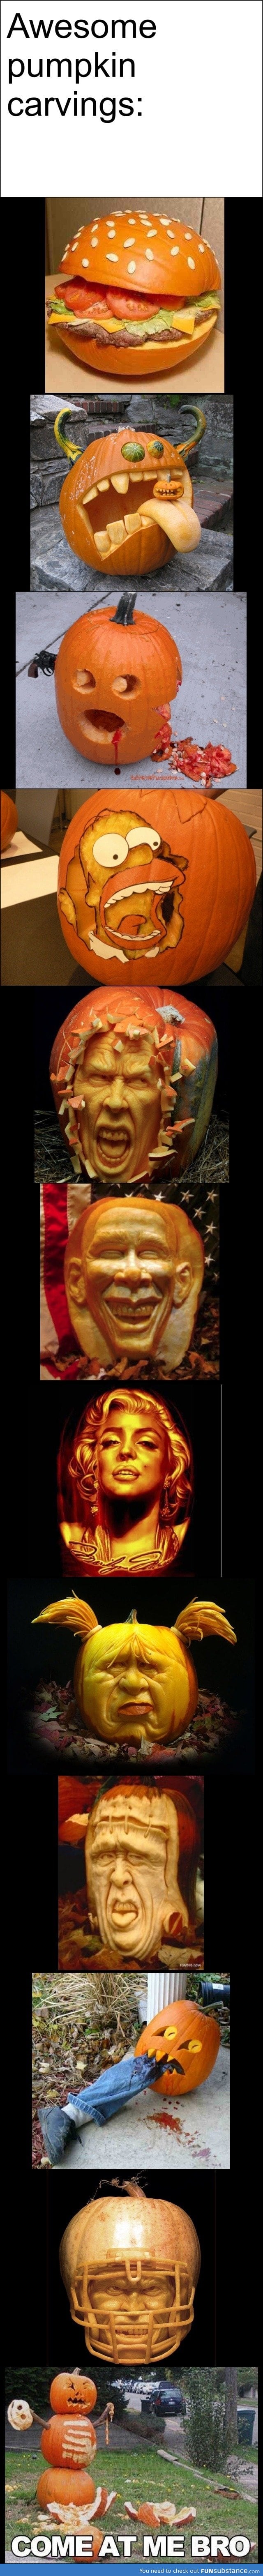 Awesome pumpkin carvings